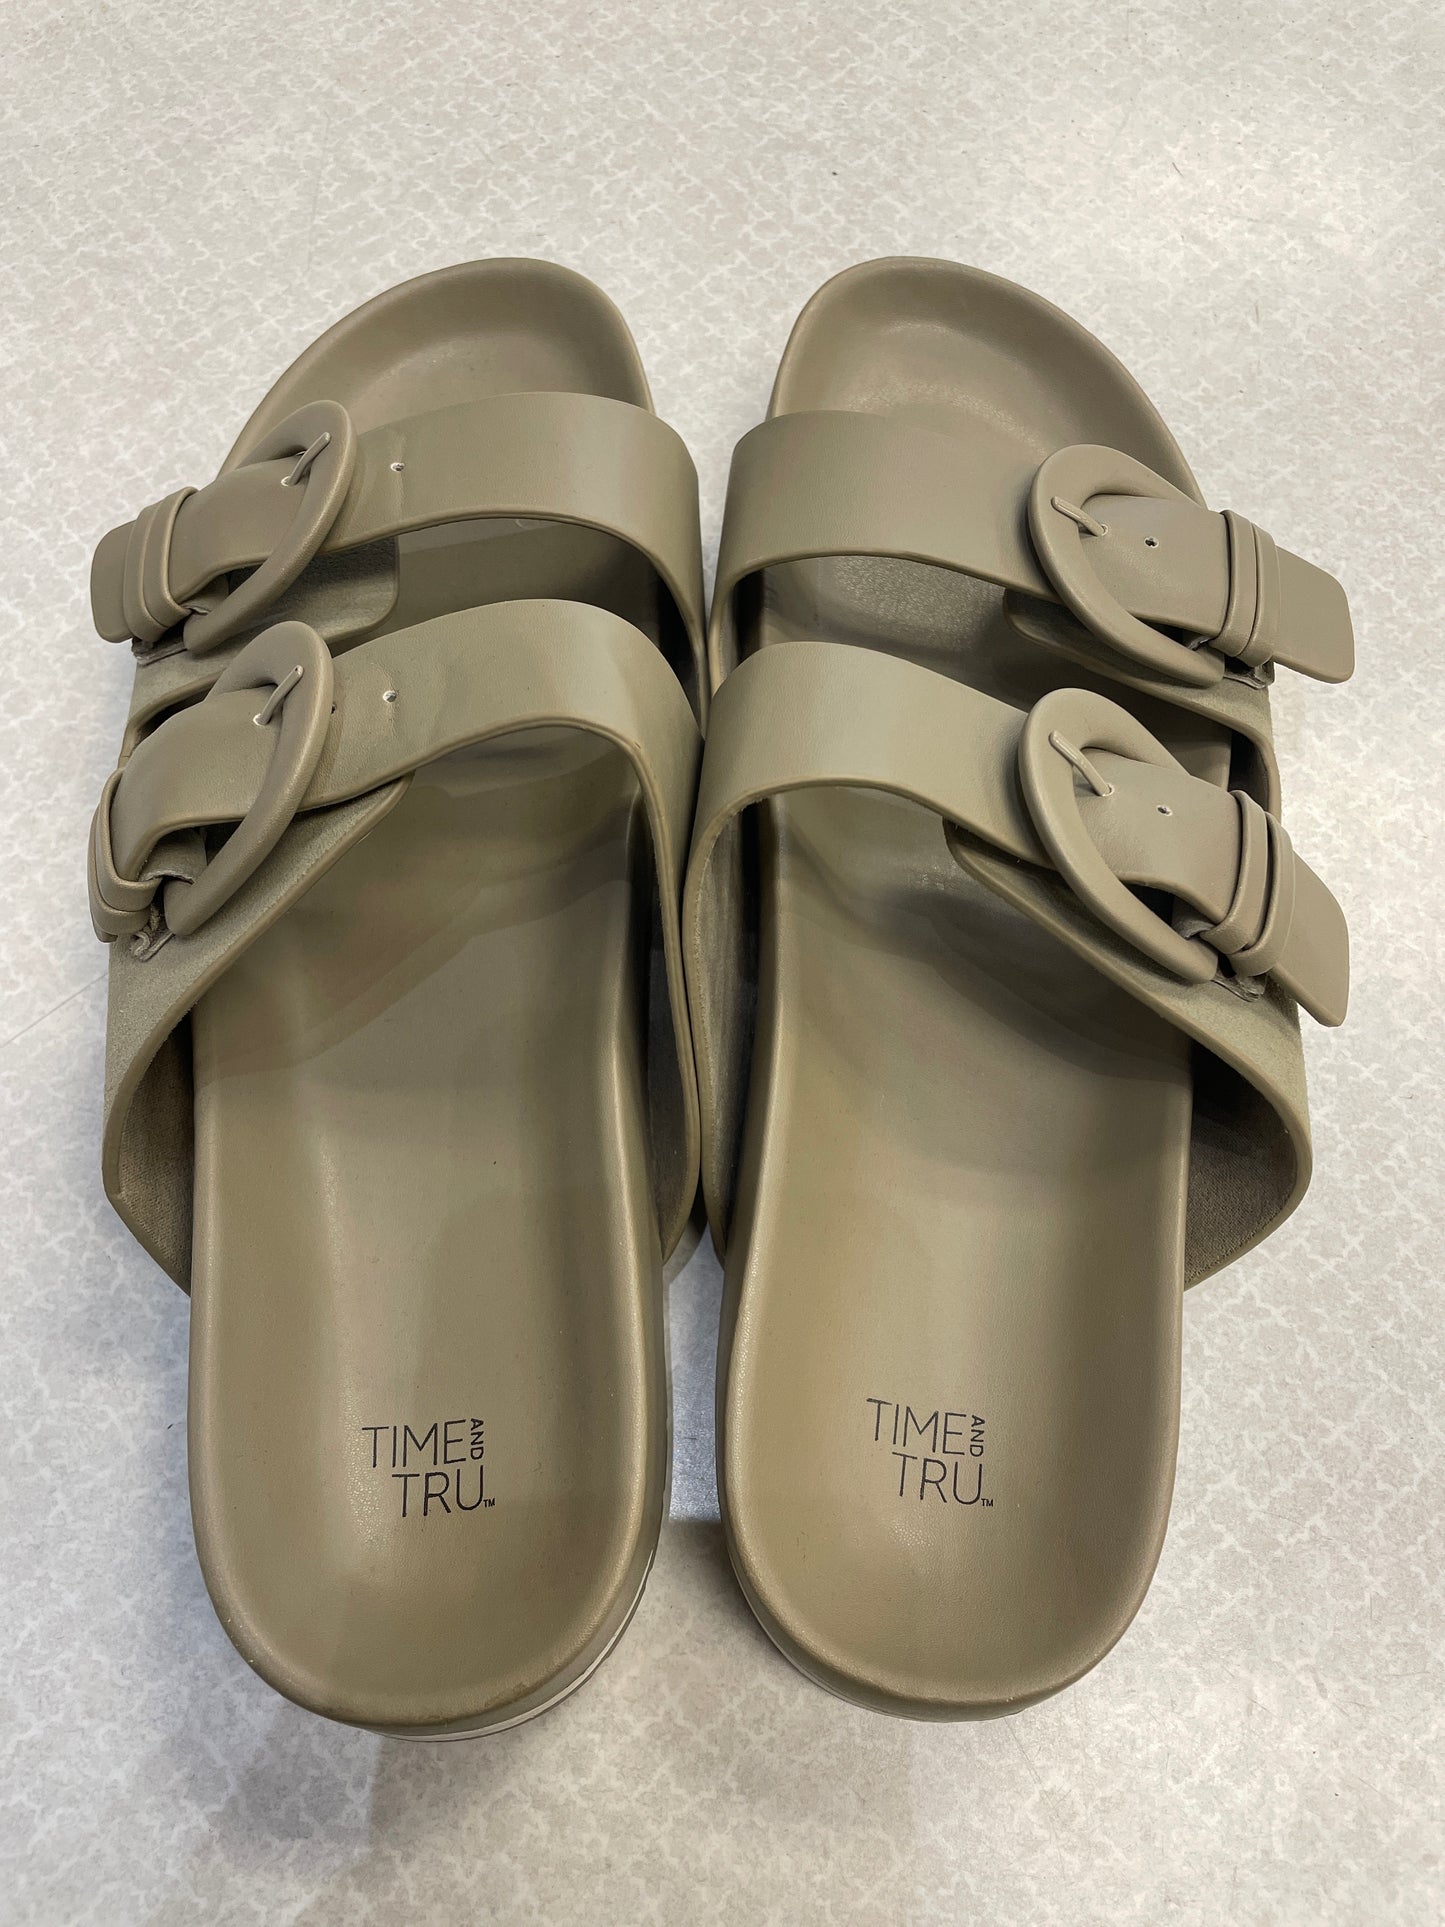 Sandals Flats By Time And Tru  Size: 11